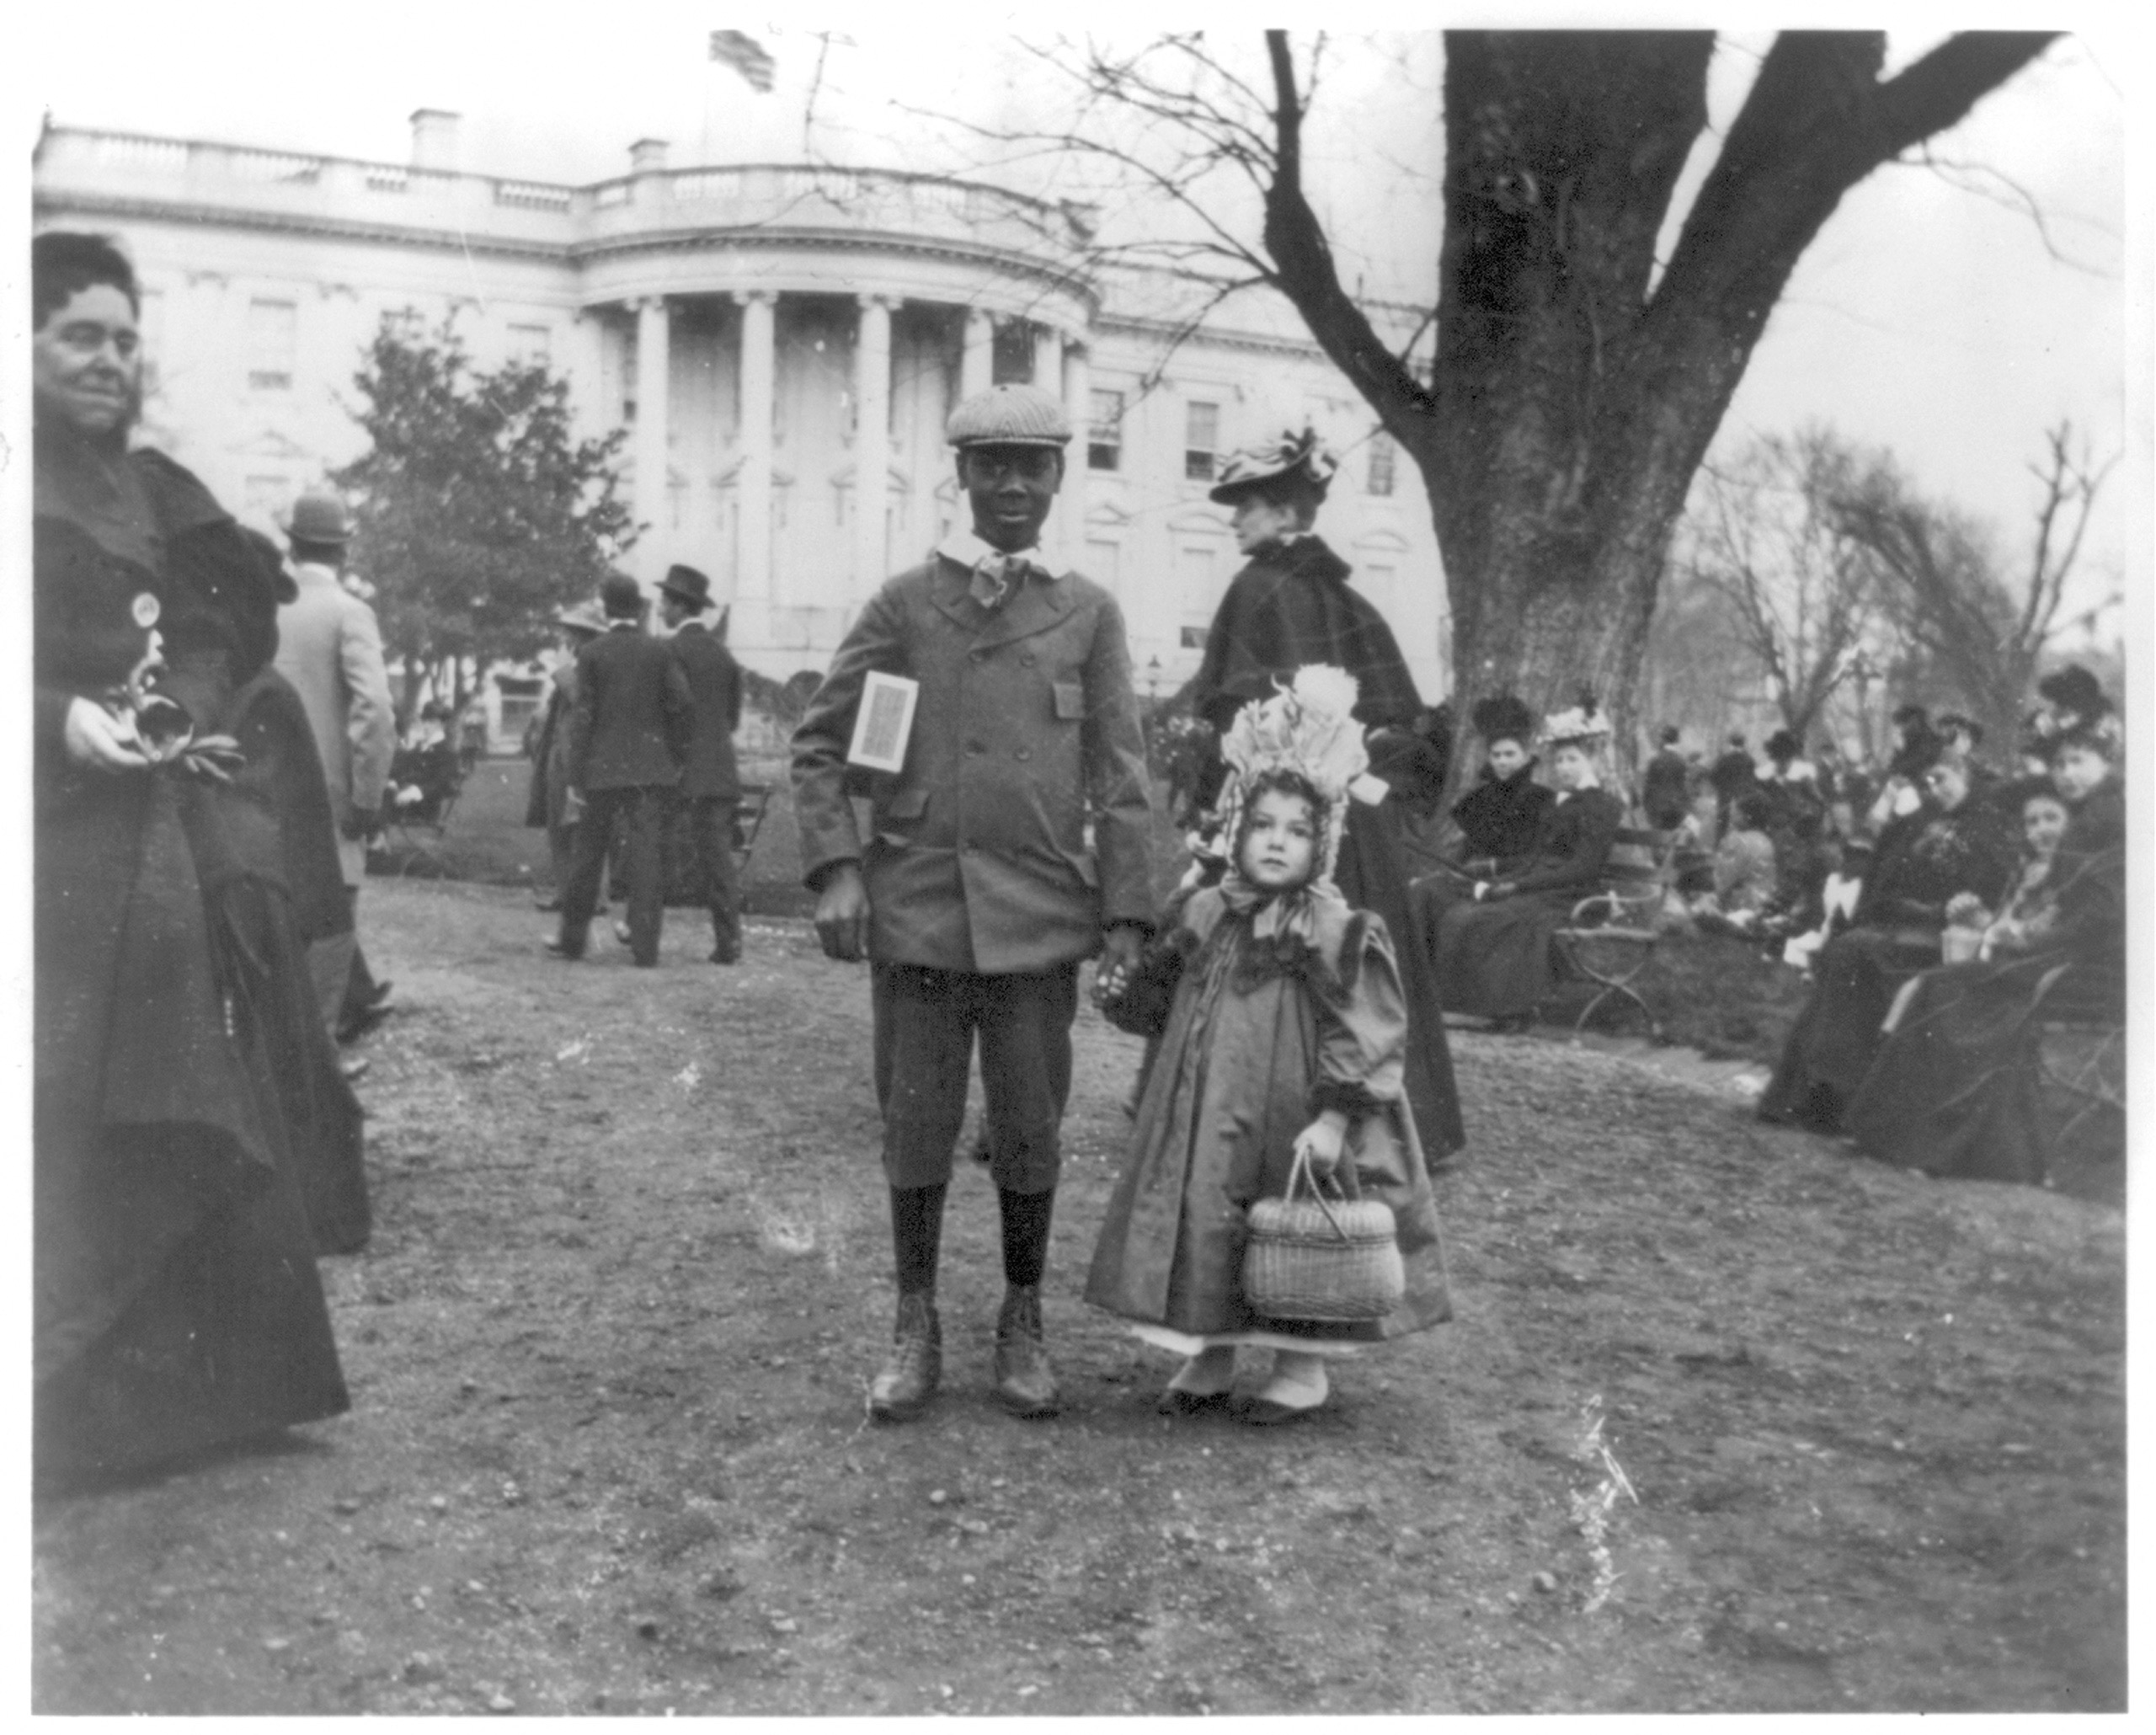 Two participants in the Easter egg roll during the Hayes administration.